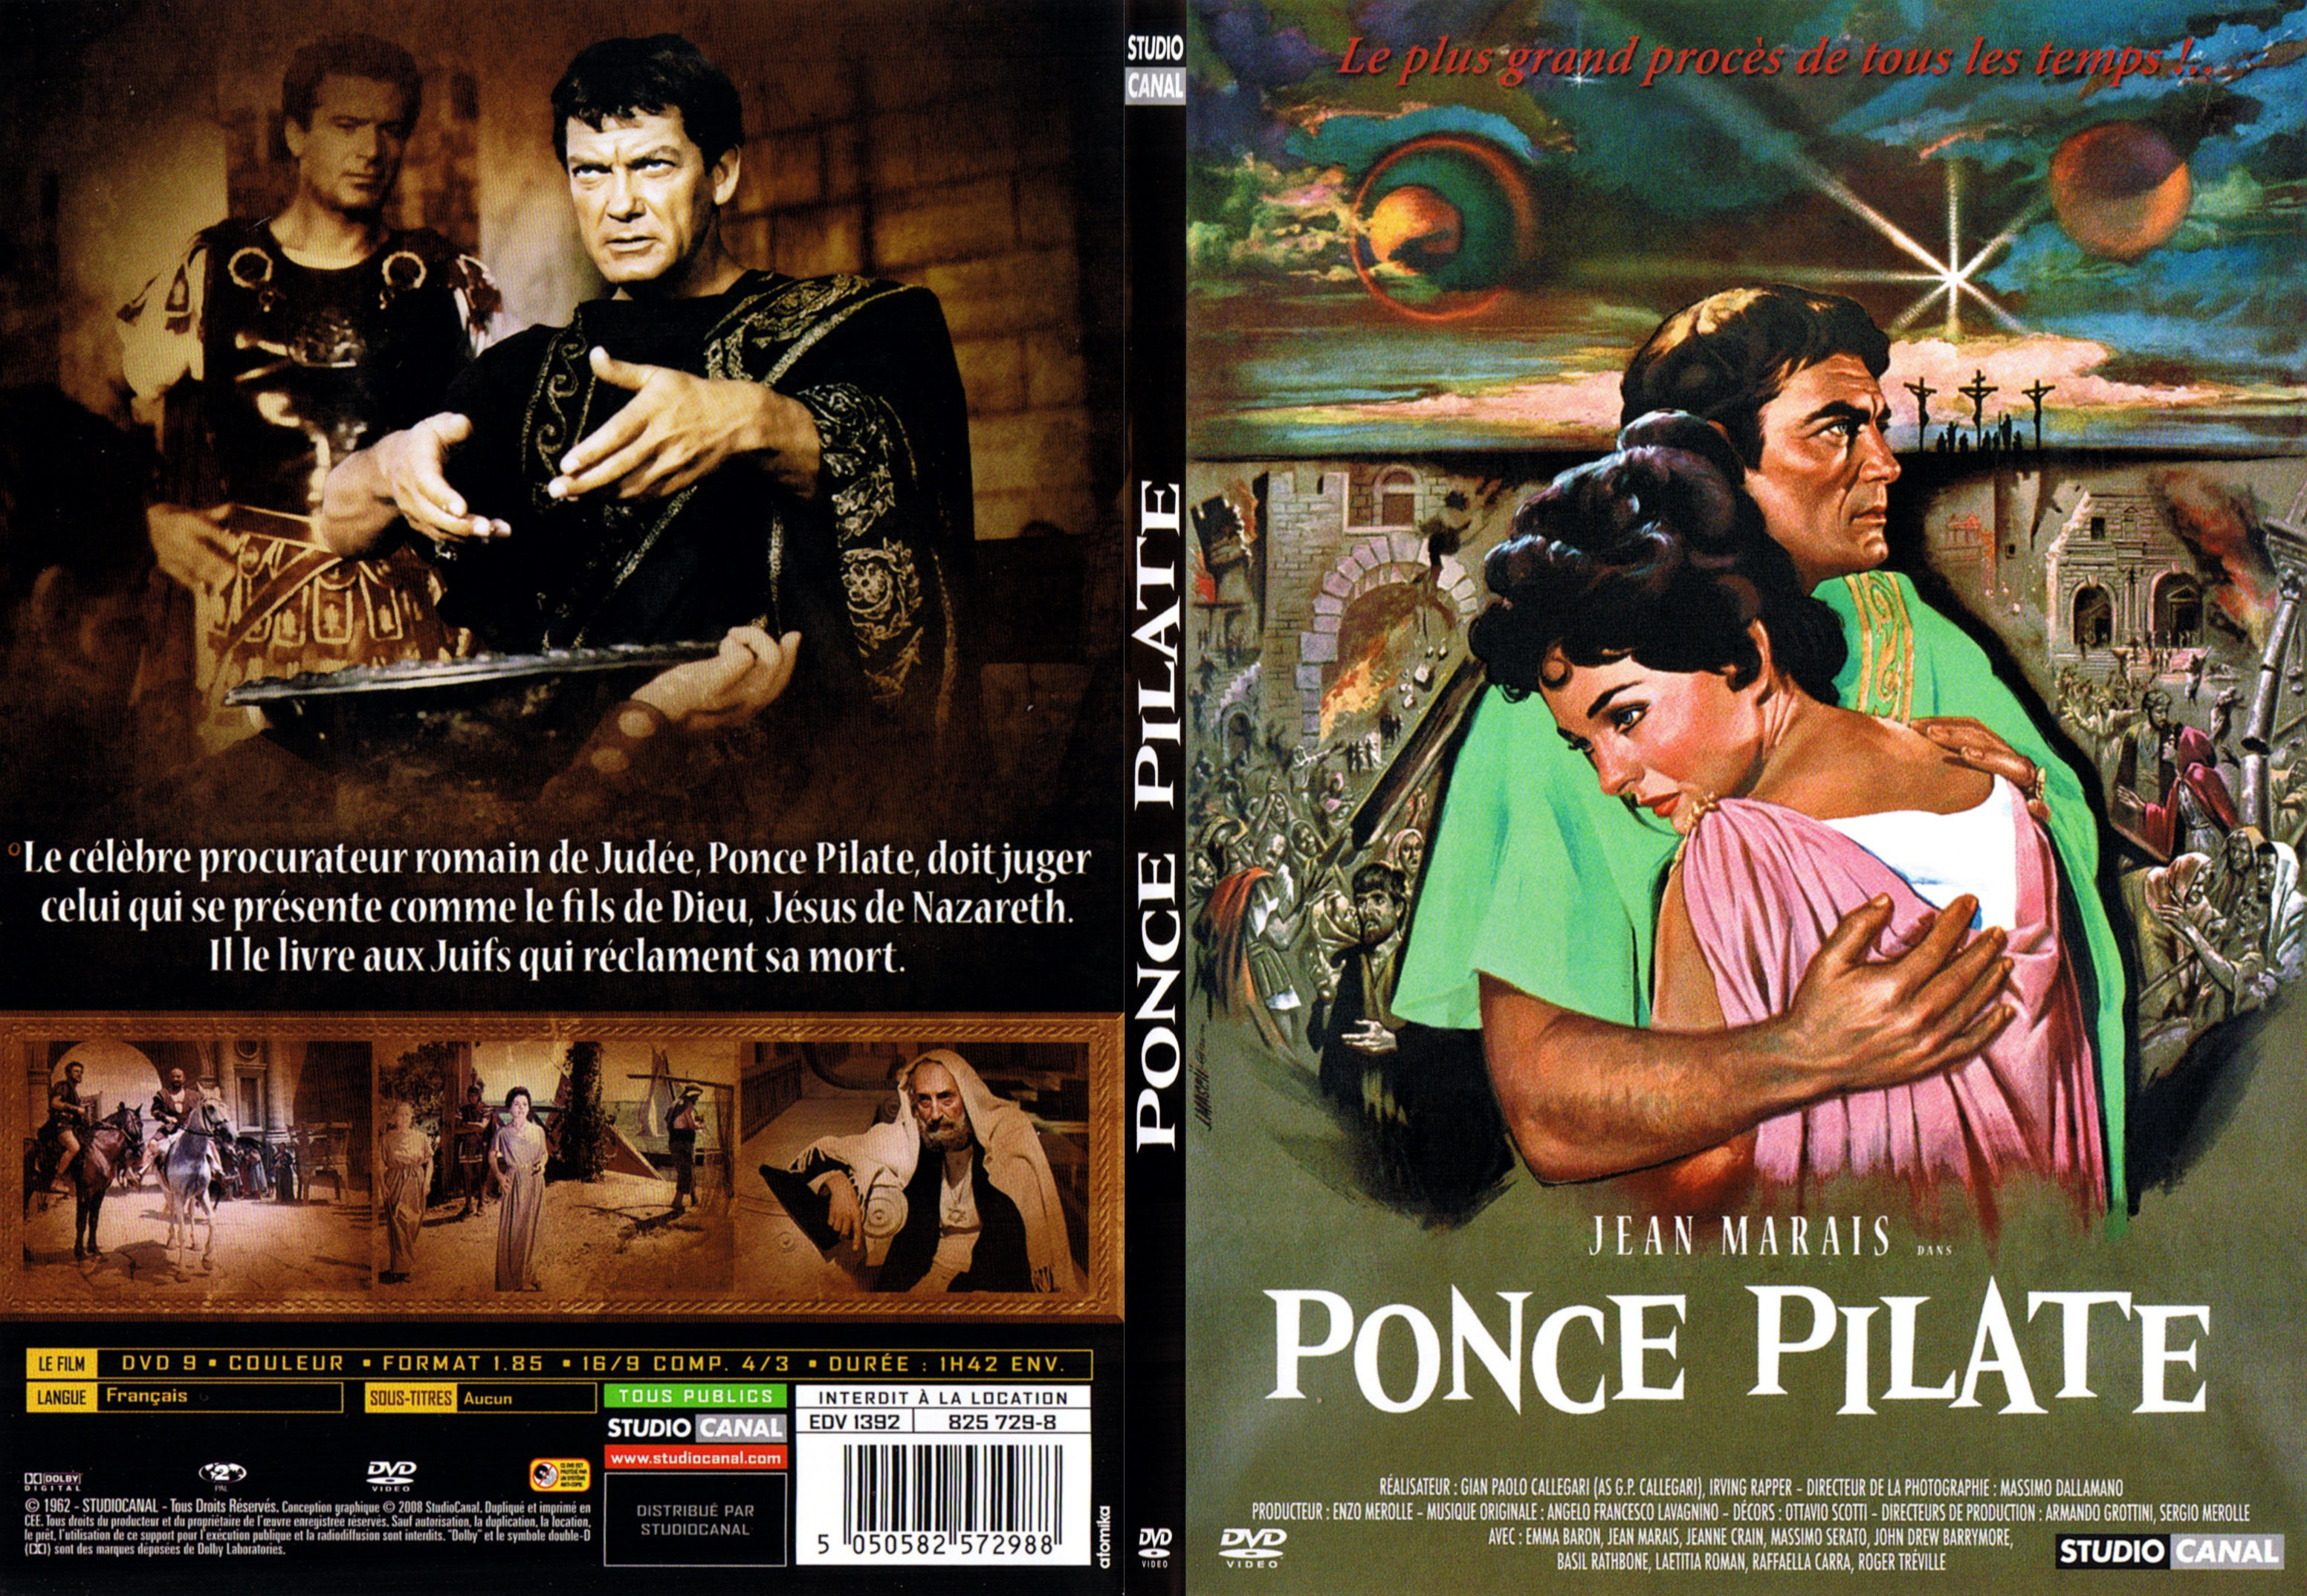 Jaquette DVD Ponce Pilate - SLIM